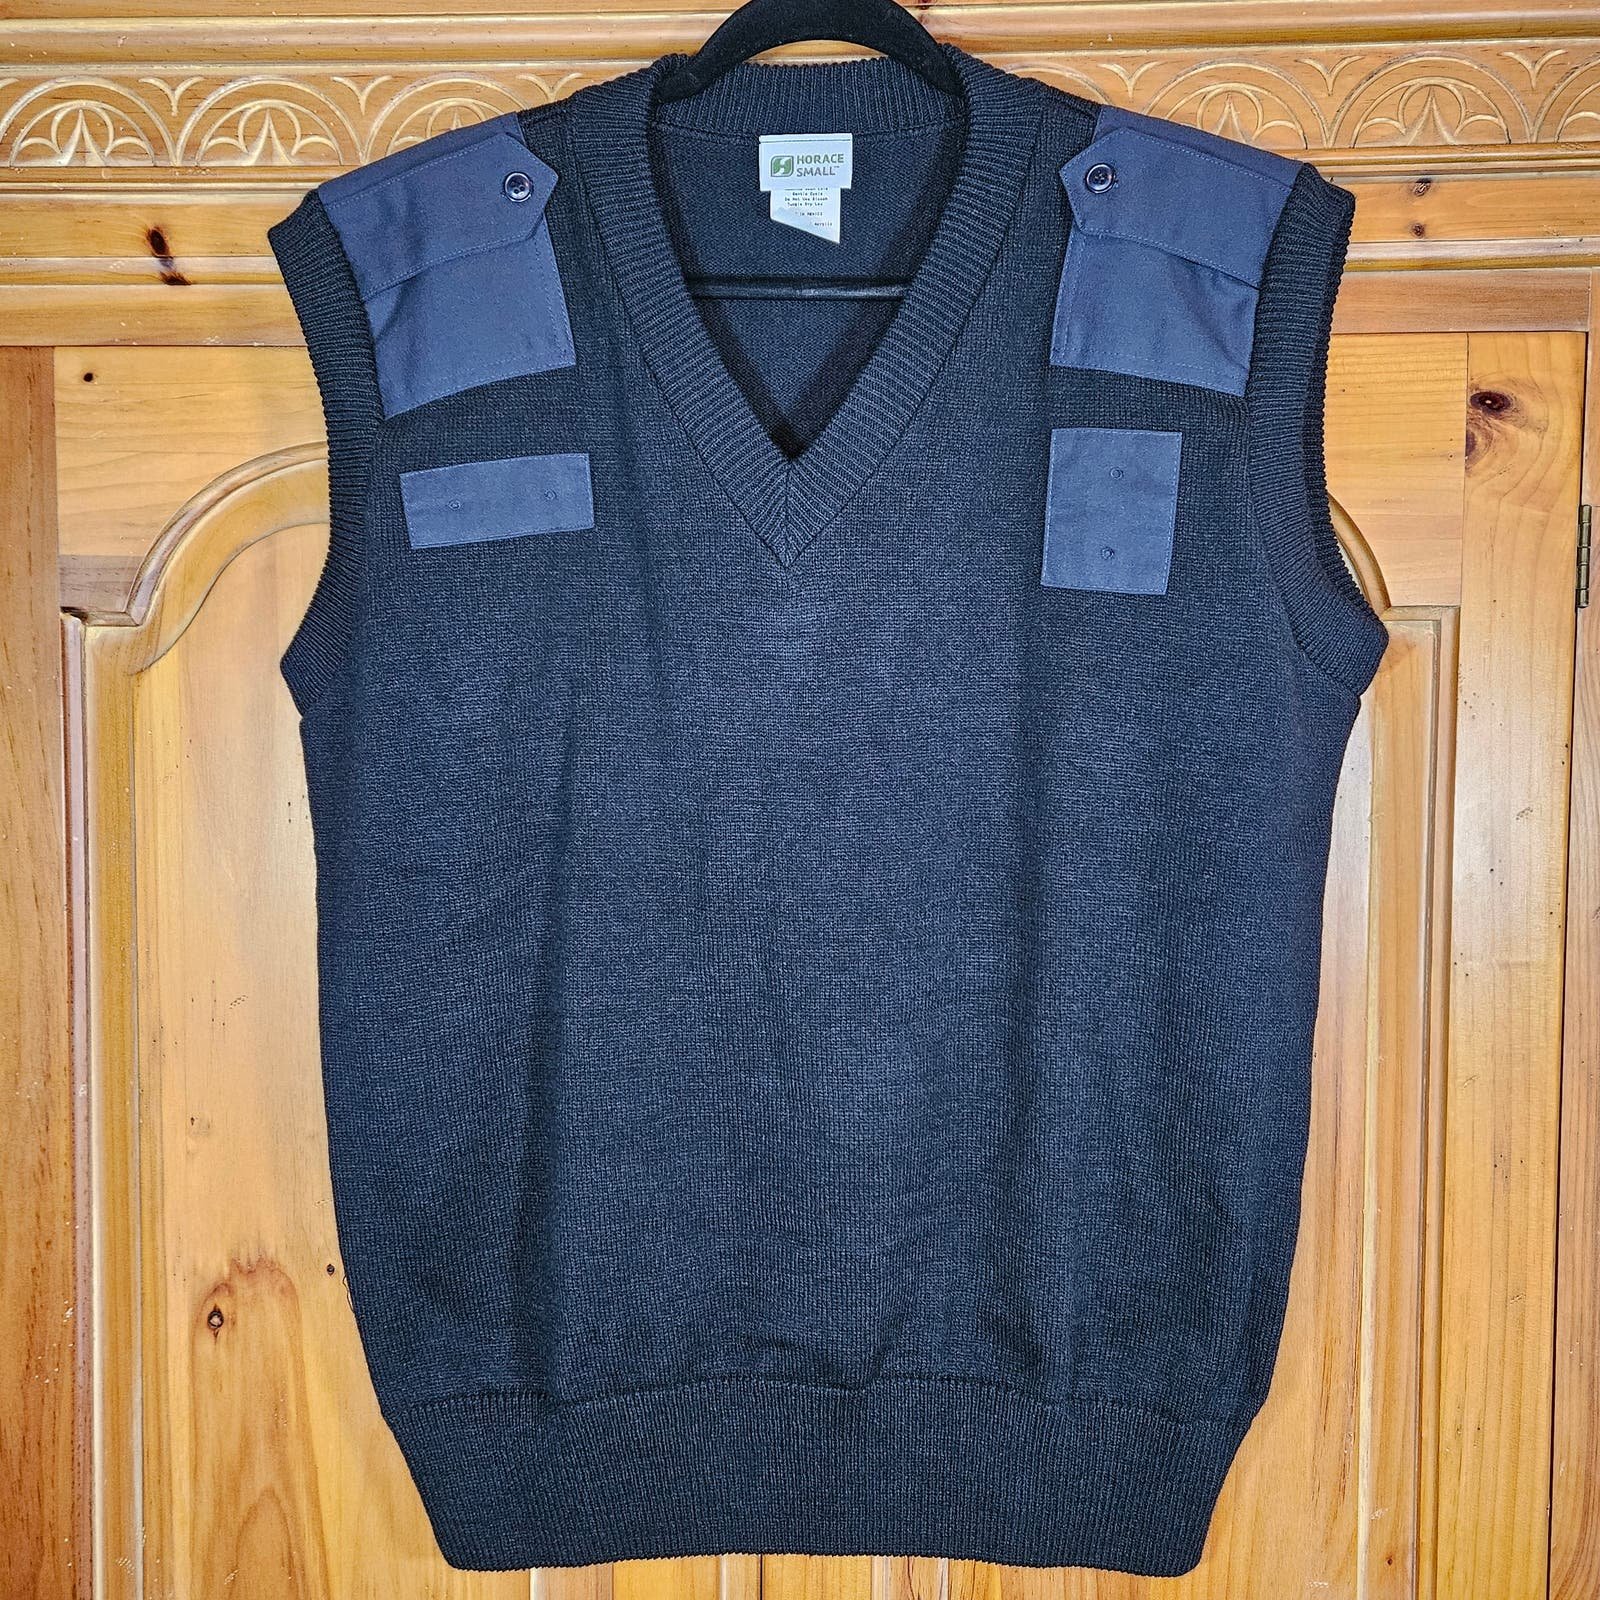 Navy Blue Horace Small by VF Imagewear Acrylic First Responder´s Vest Size Large GEoh9ex1u